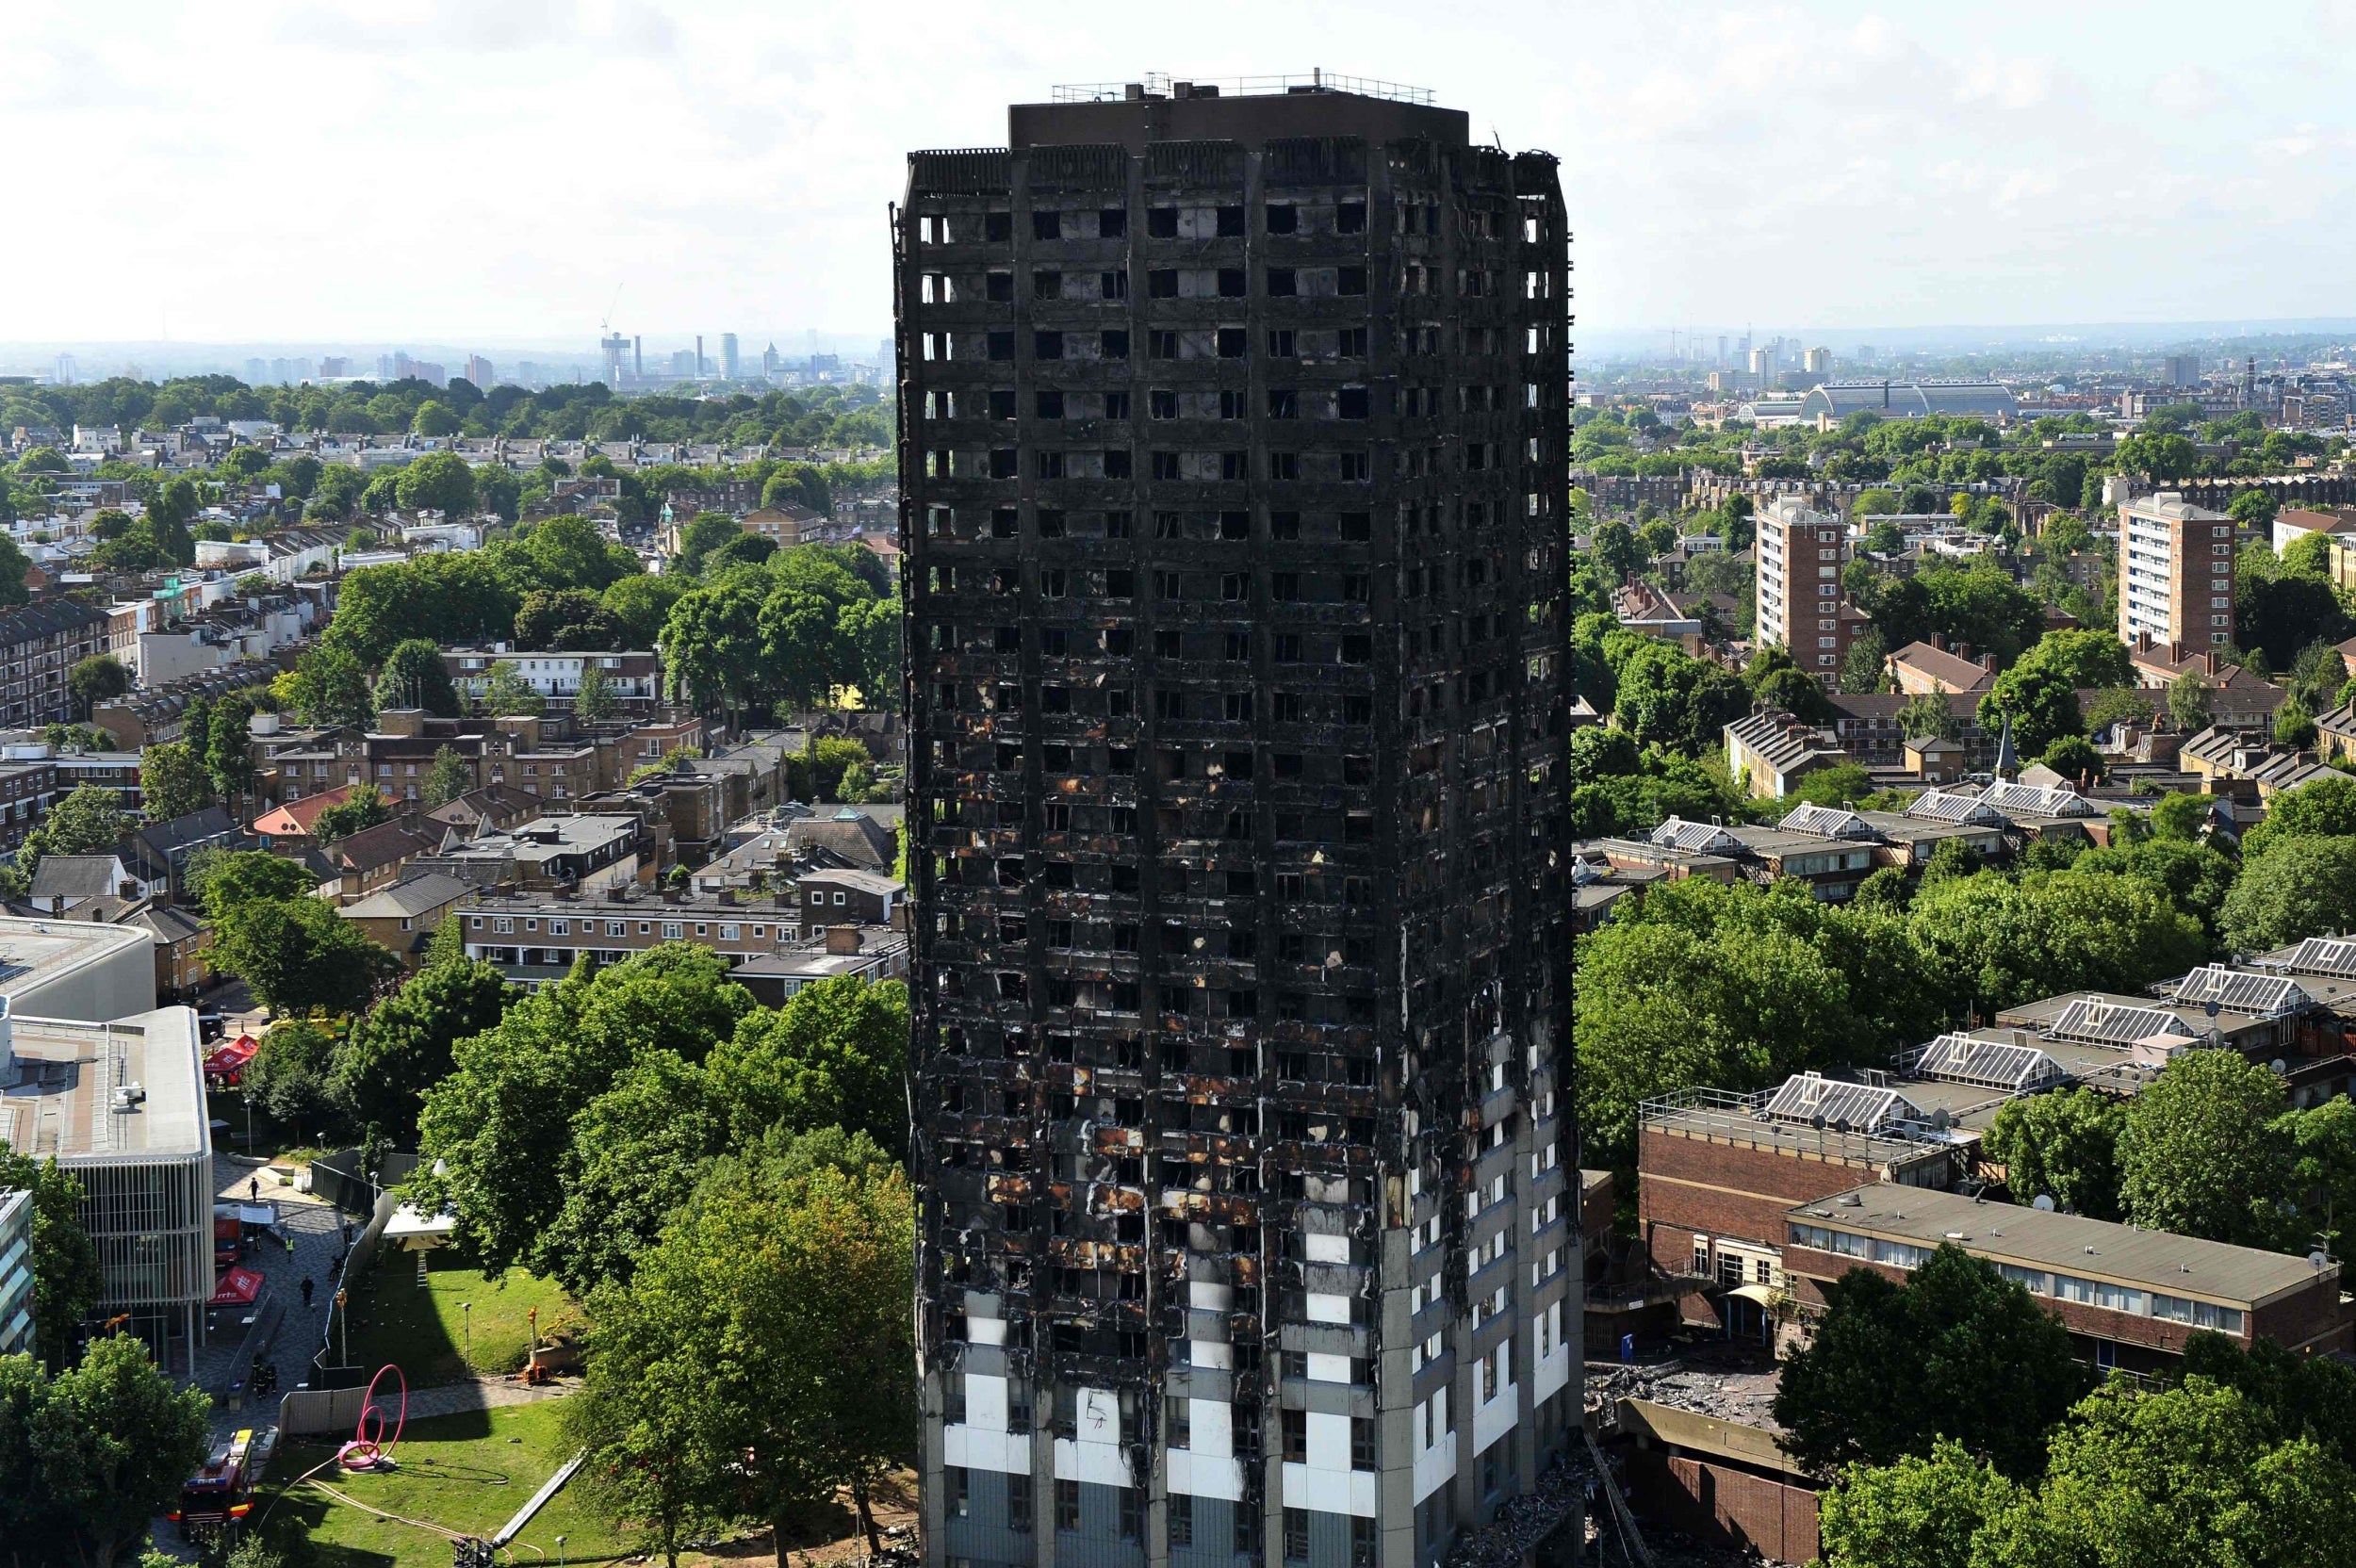 Flammable cladding has been blamed for the fire which destroyed 24-storey Grenfell Tower